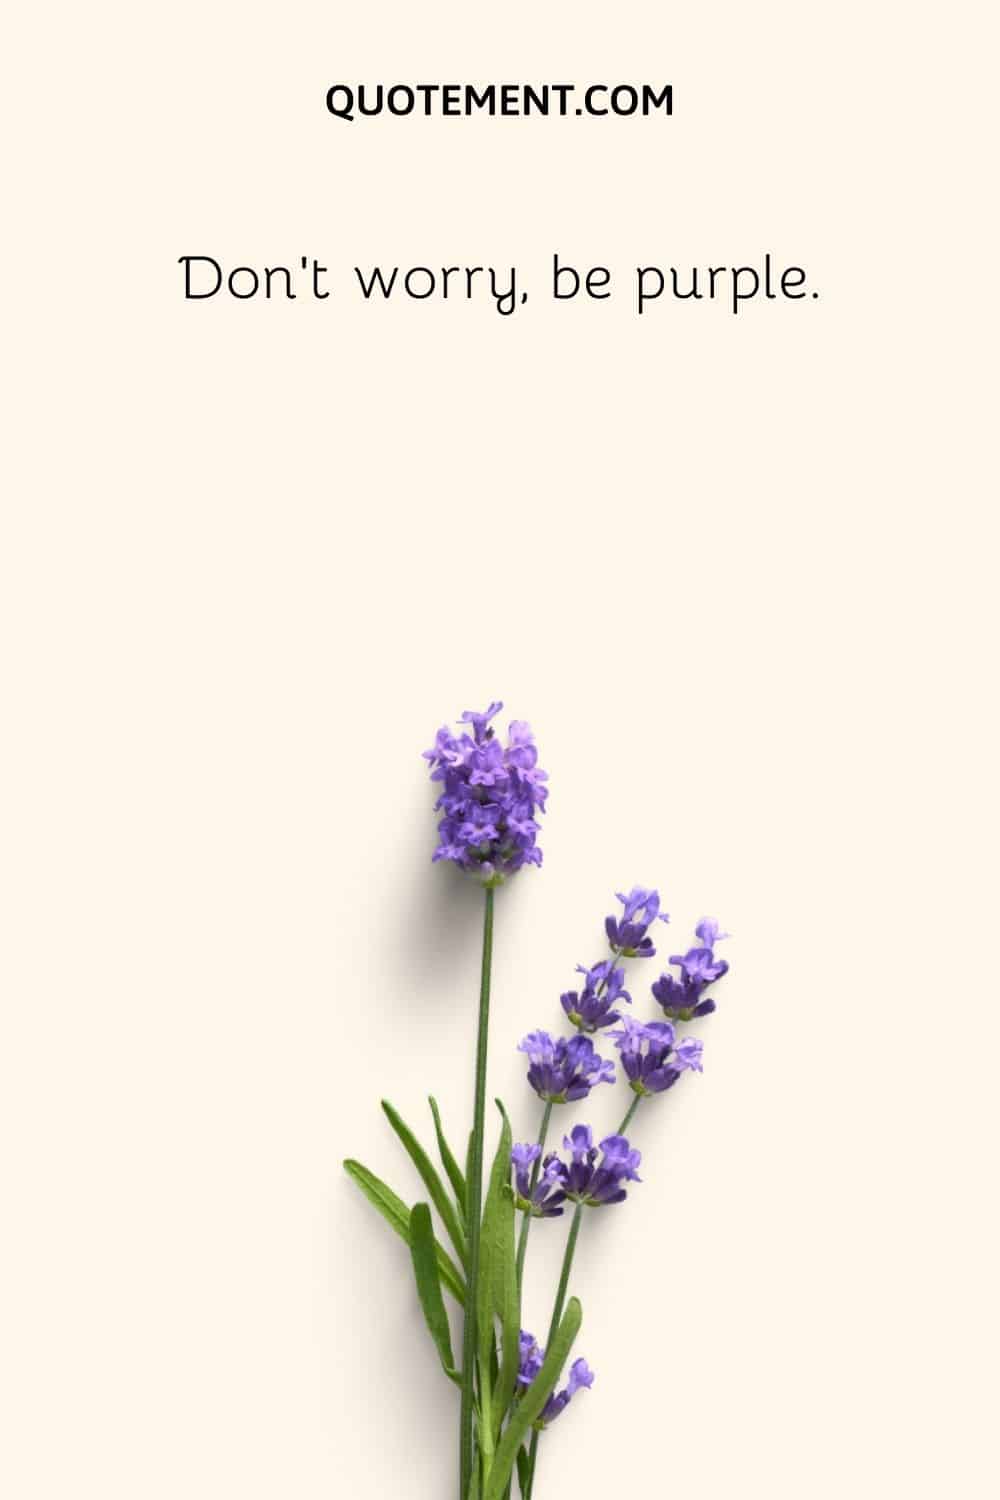 Don’t worry, be purple